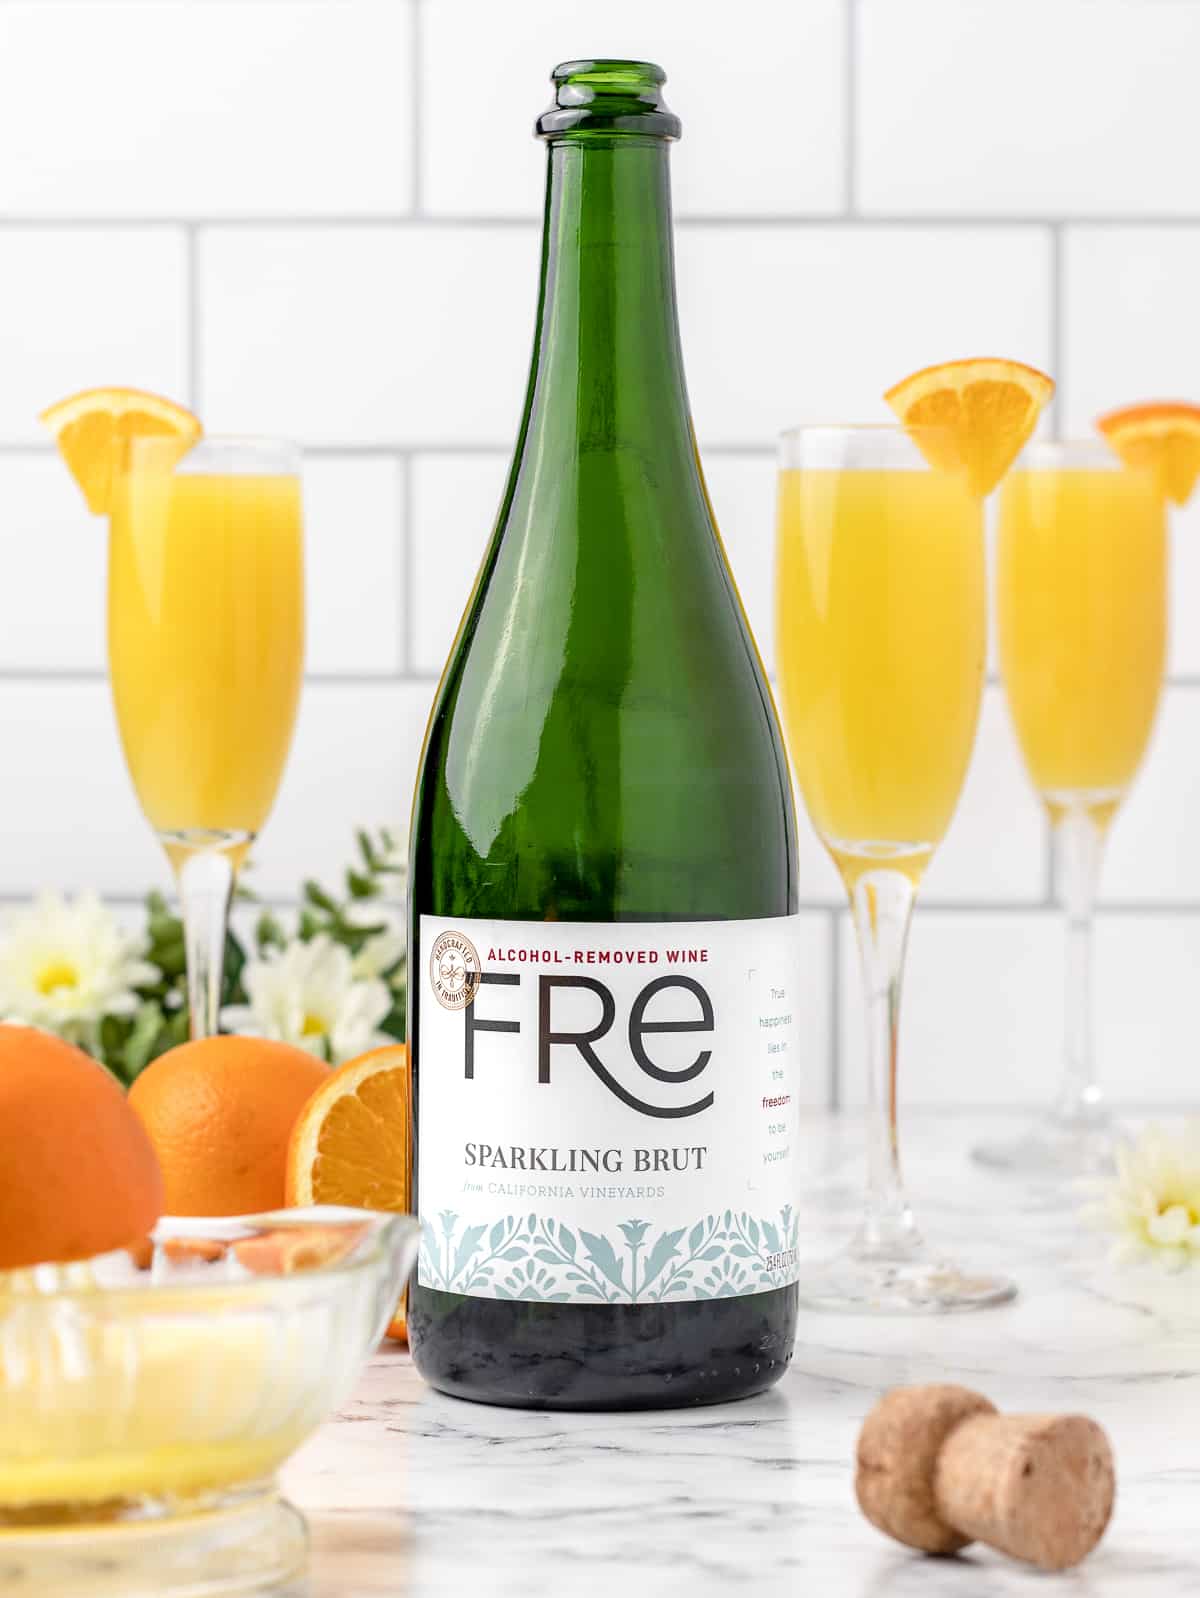 A bottle of alcohol removed non alcoholic champagne. Fre sparkling brut.